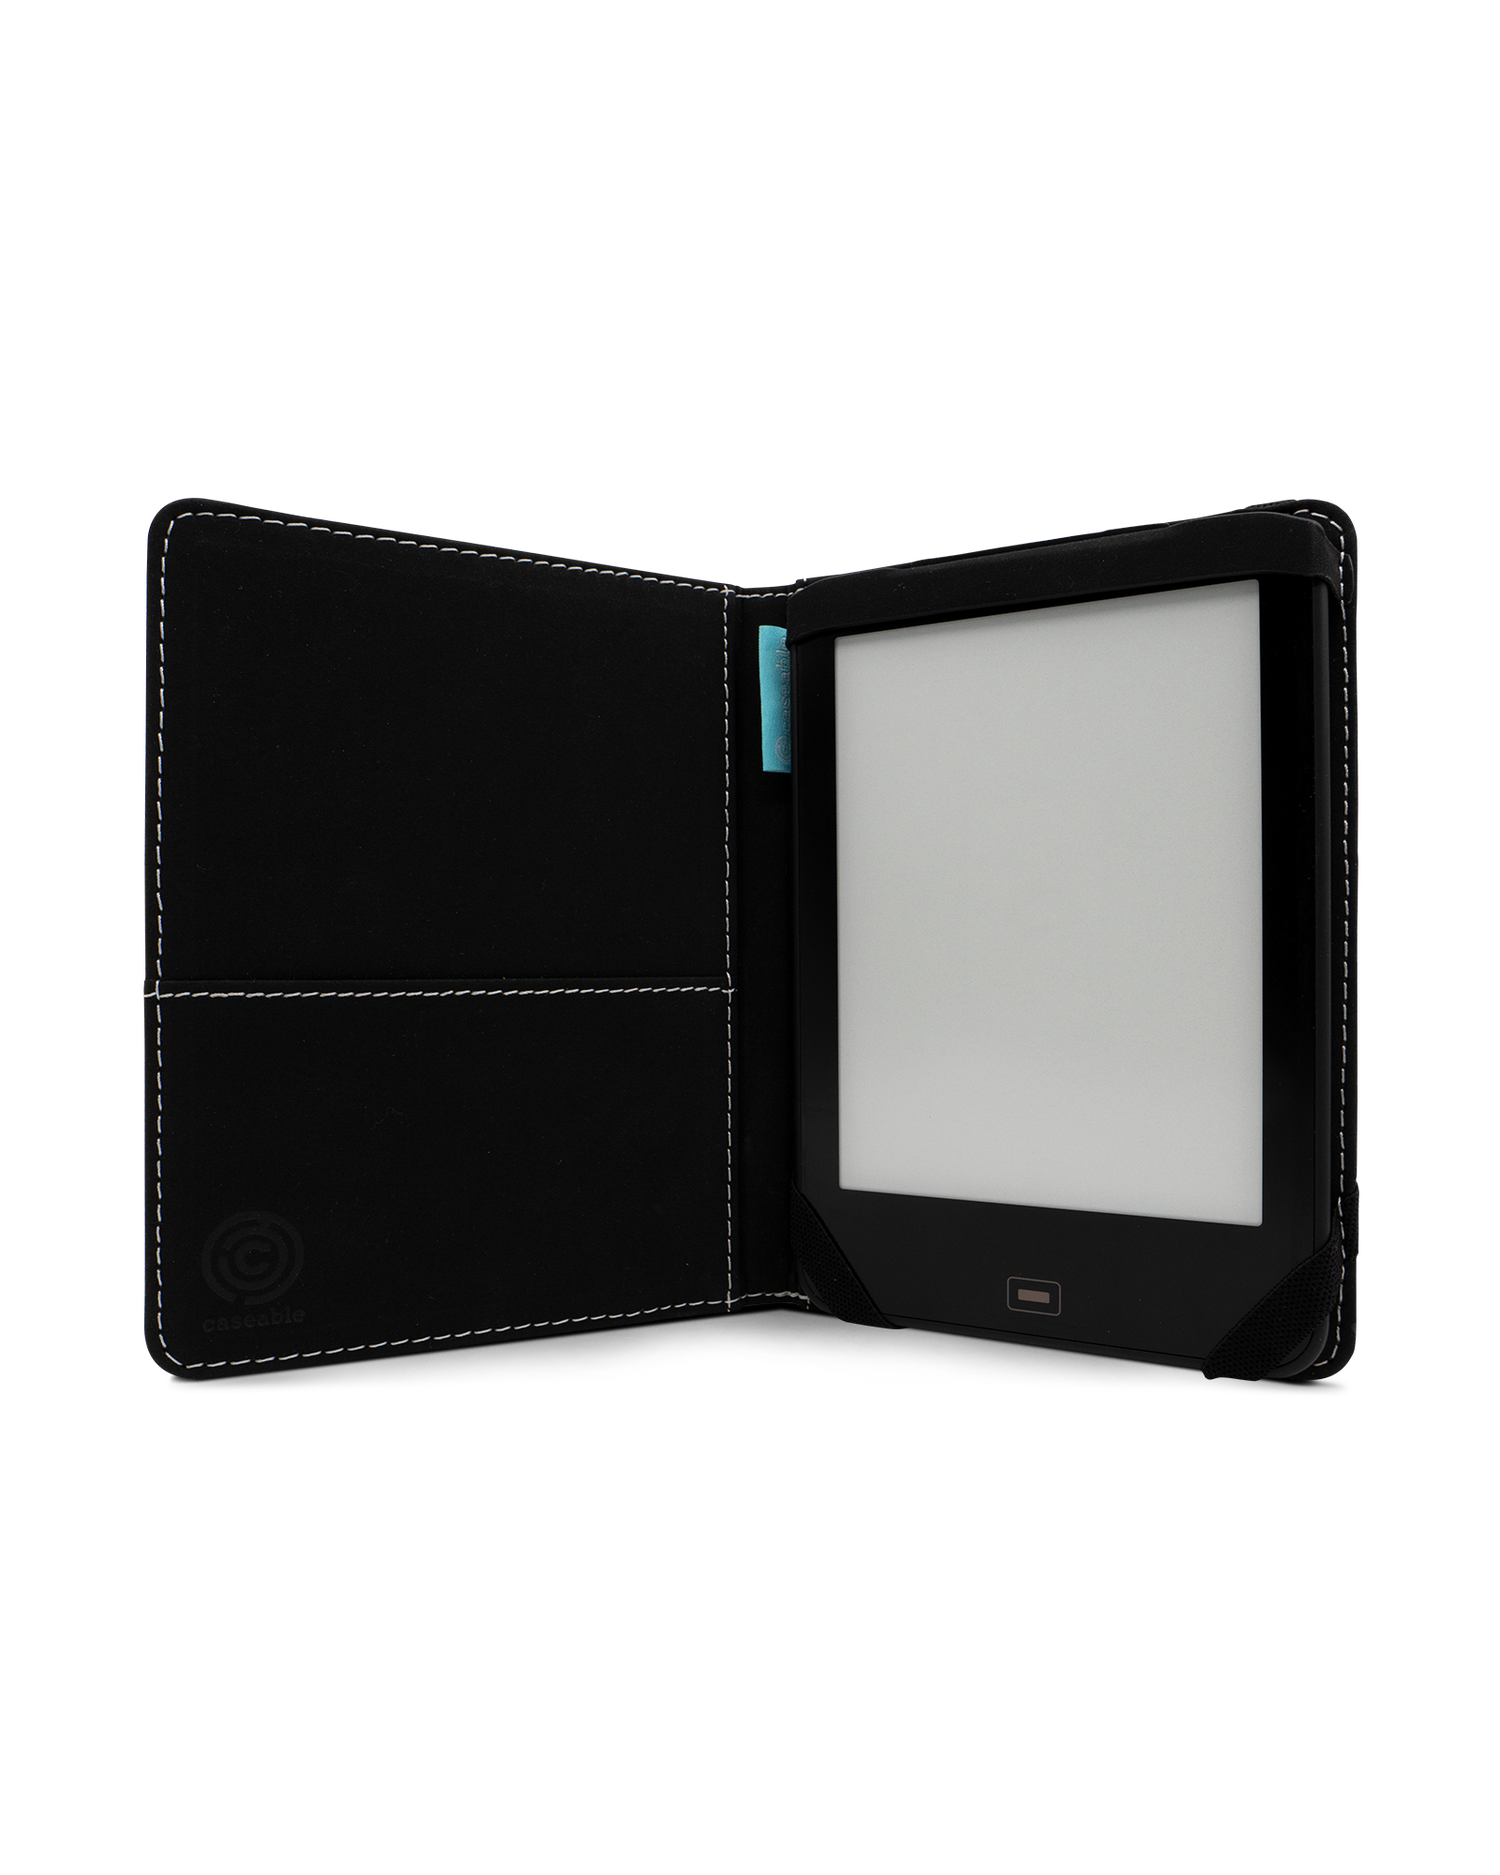 Psychedelic Optics eReader Case for tolino vision 1 to 4 HD: Opened interior view